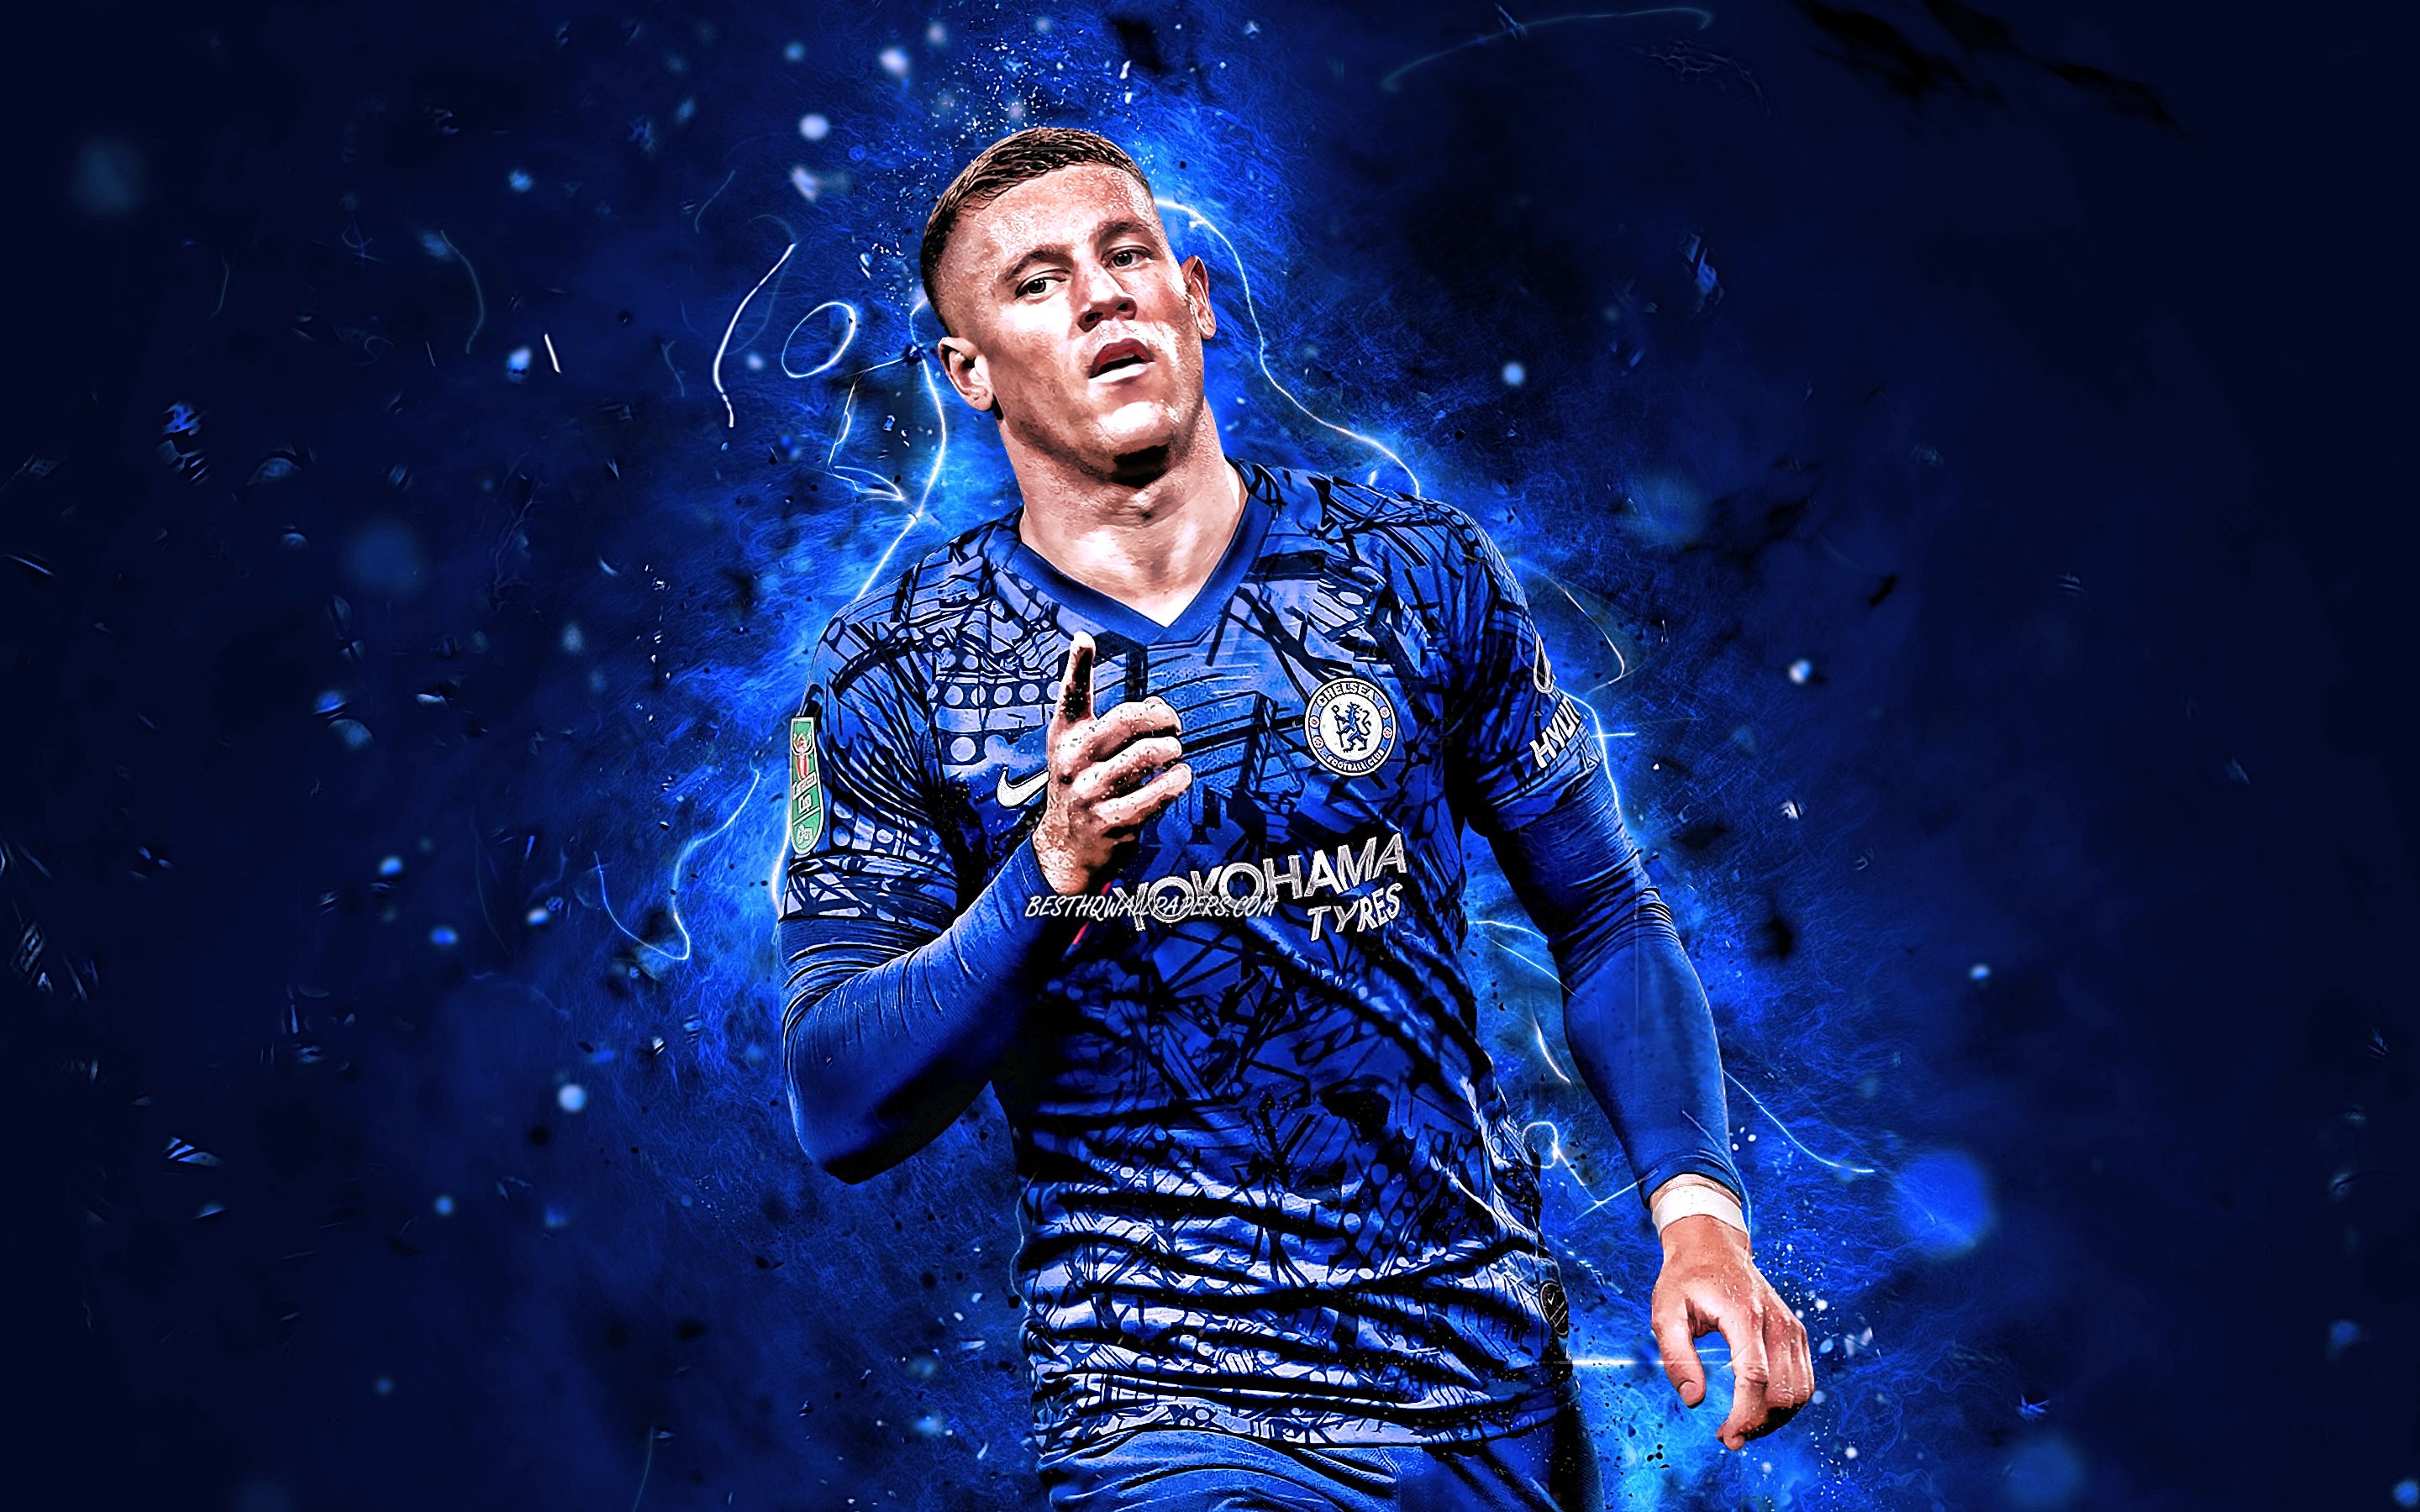 Chelsea FC 2020 Wallpapers - Wallpaper Cave